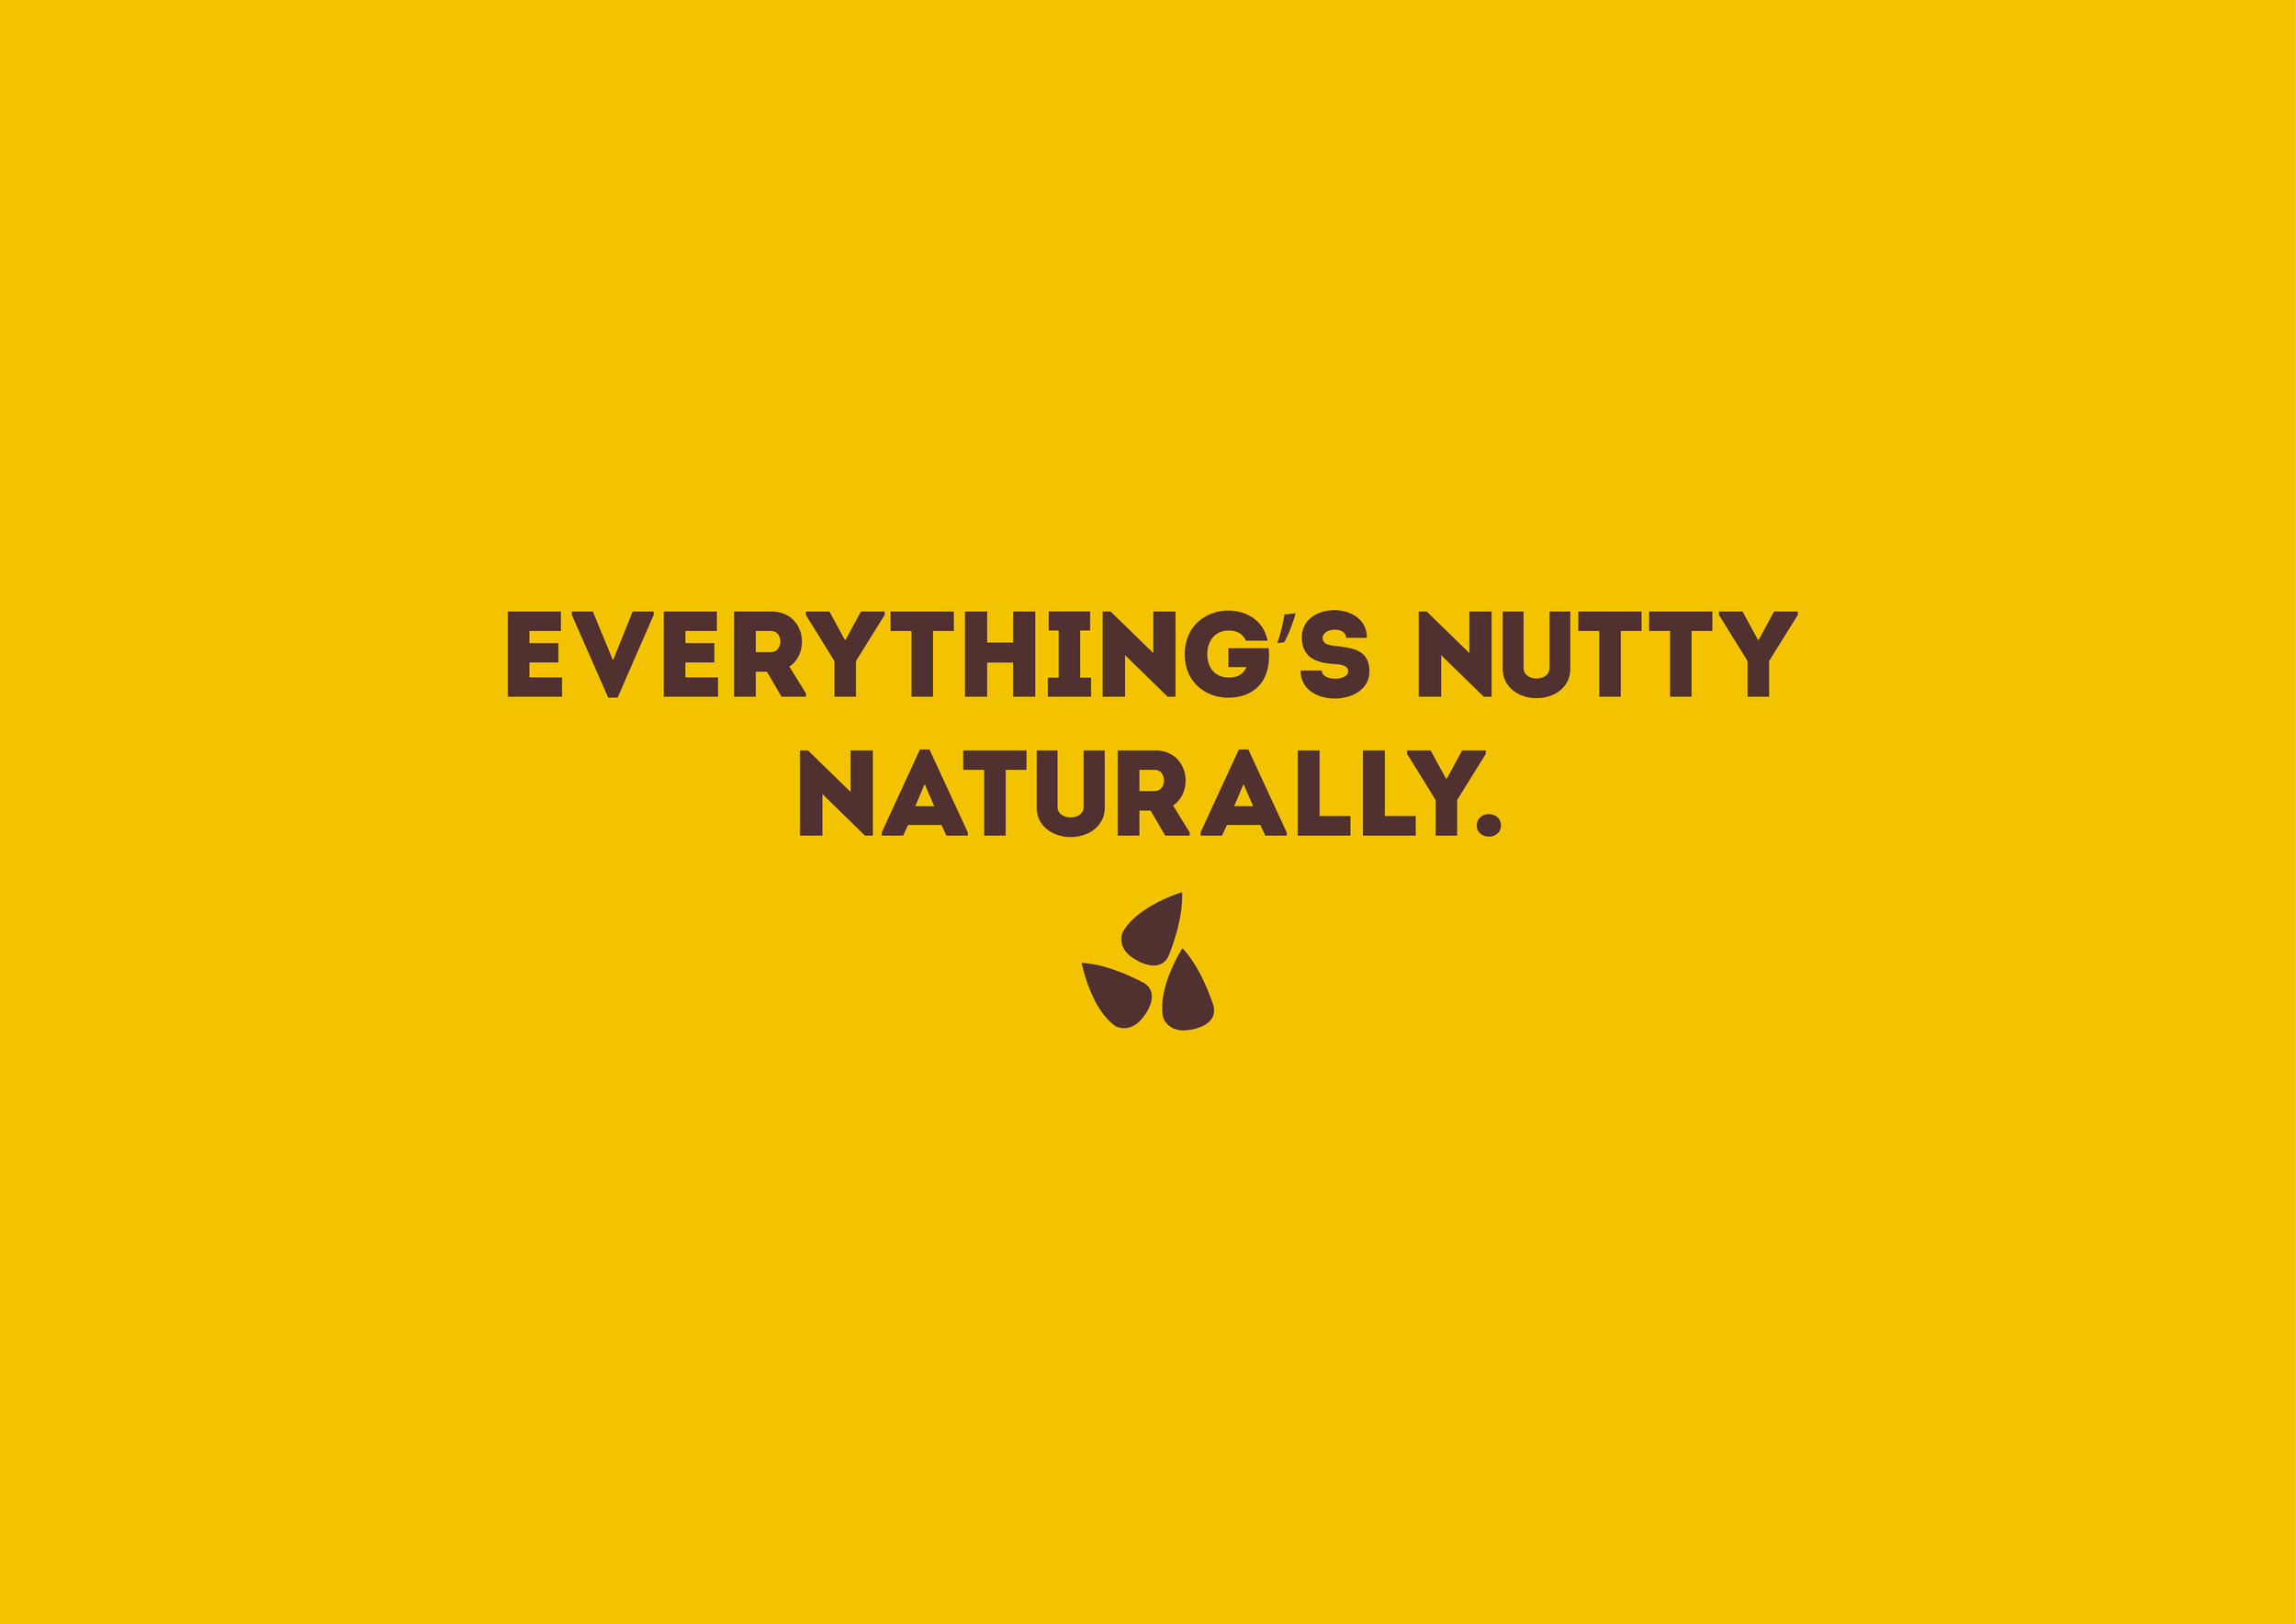 Packaging Designer UK Full Nutter company tagline Everything's Nutty Naturally